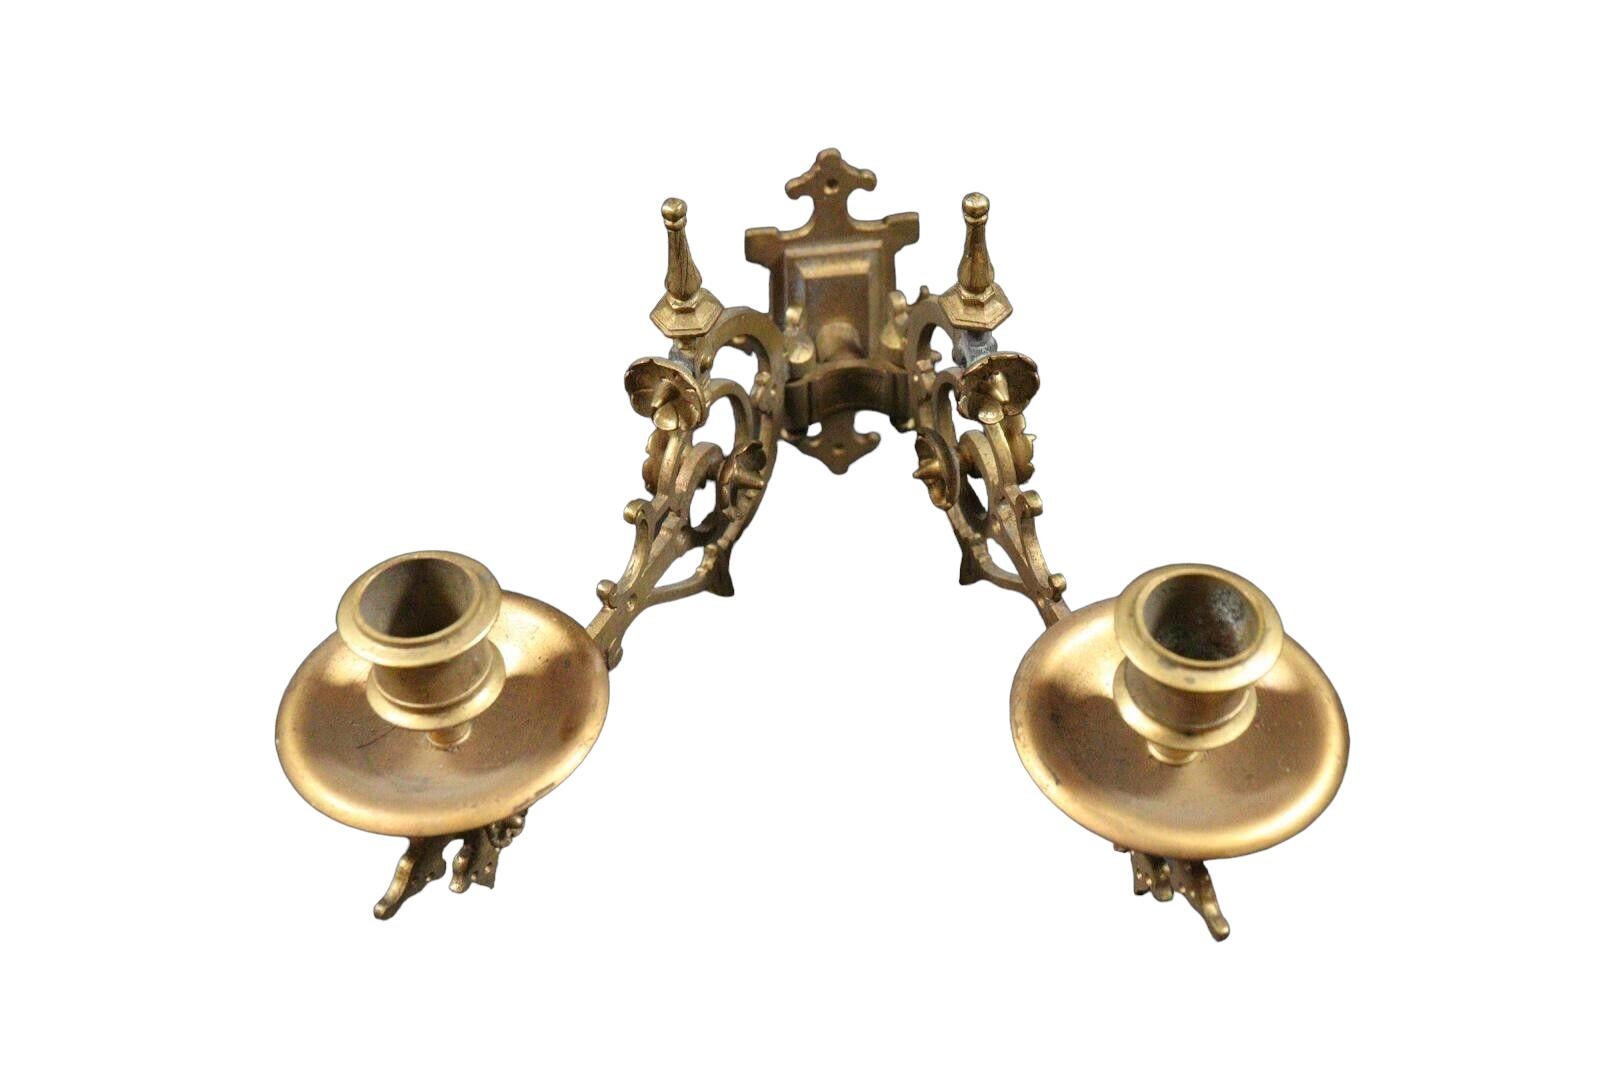 Two Original Bronze Art Nouveau Candle Sconce for a Piano or Wall Germany, 1890s In Good Condition For Sale In Nuernberg, DE